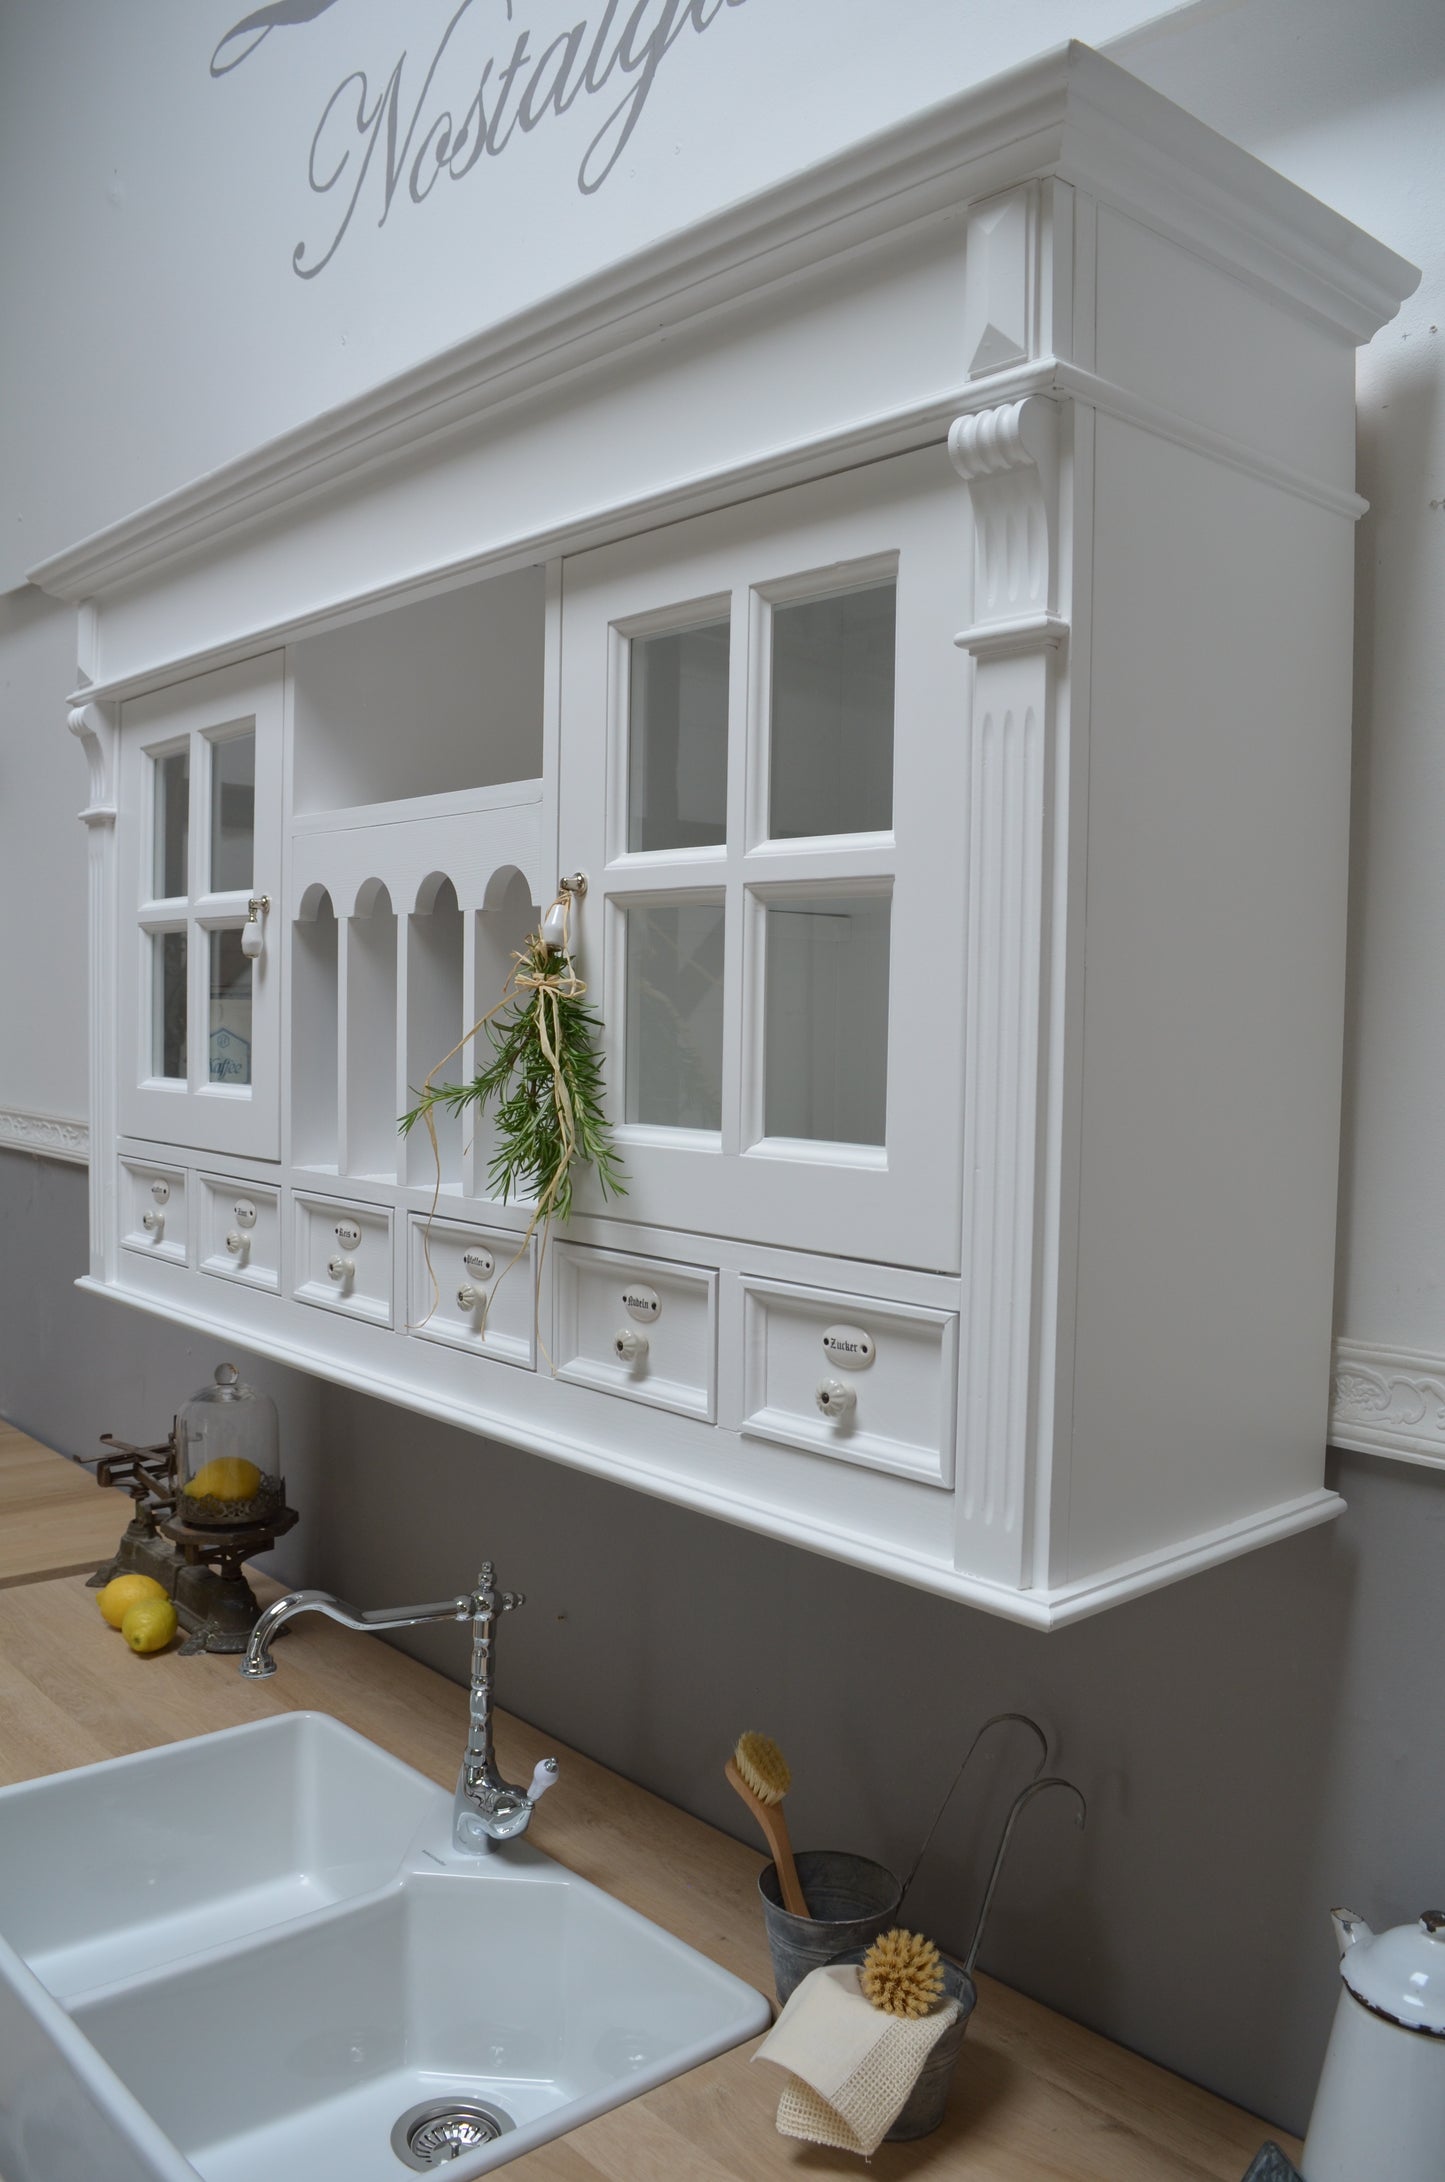 "Ronja" - kitchen wall unit in country house look